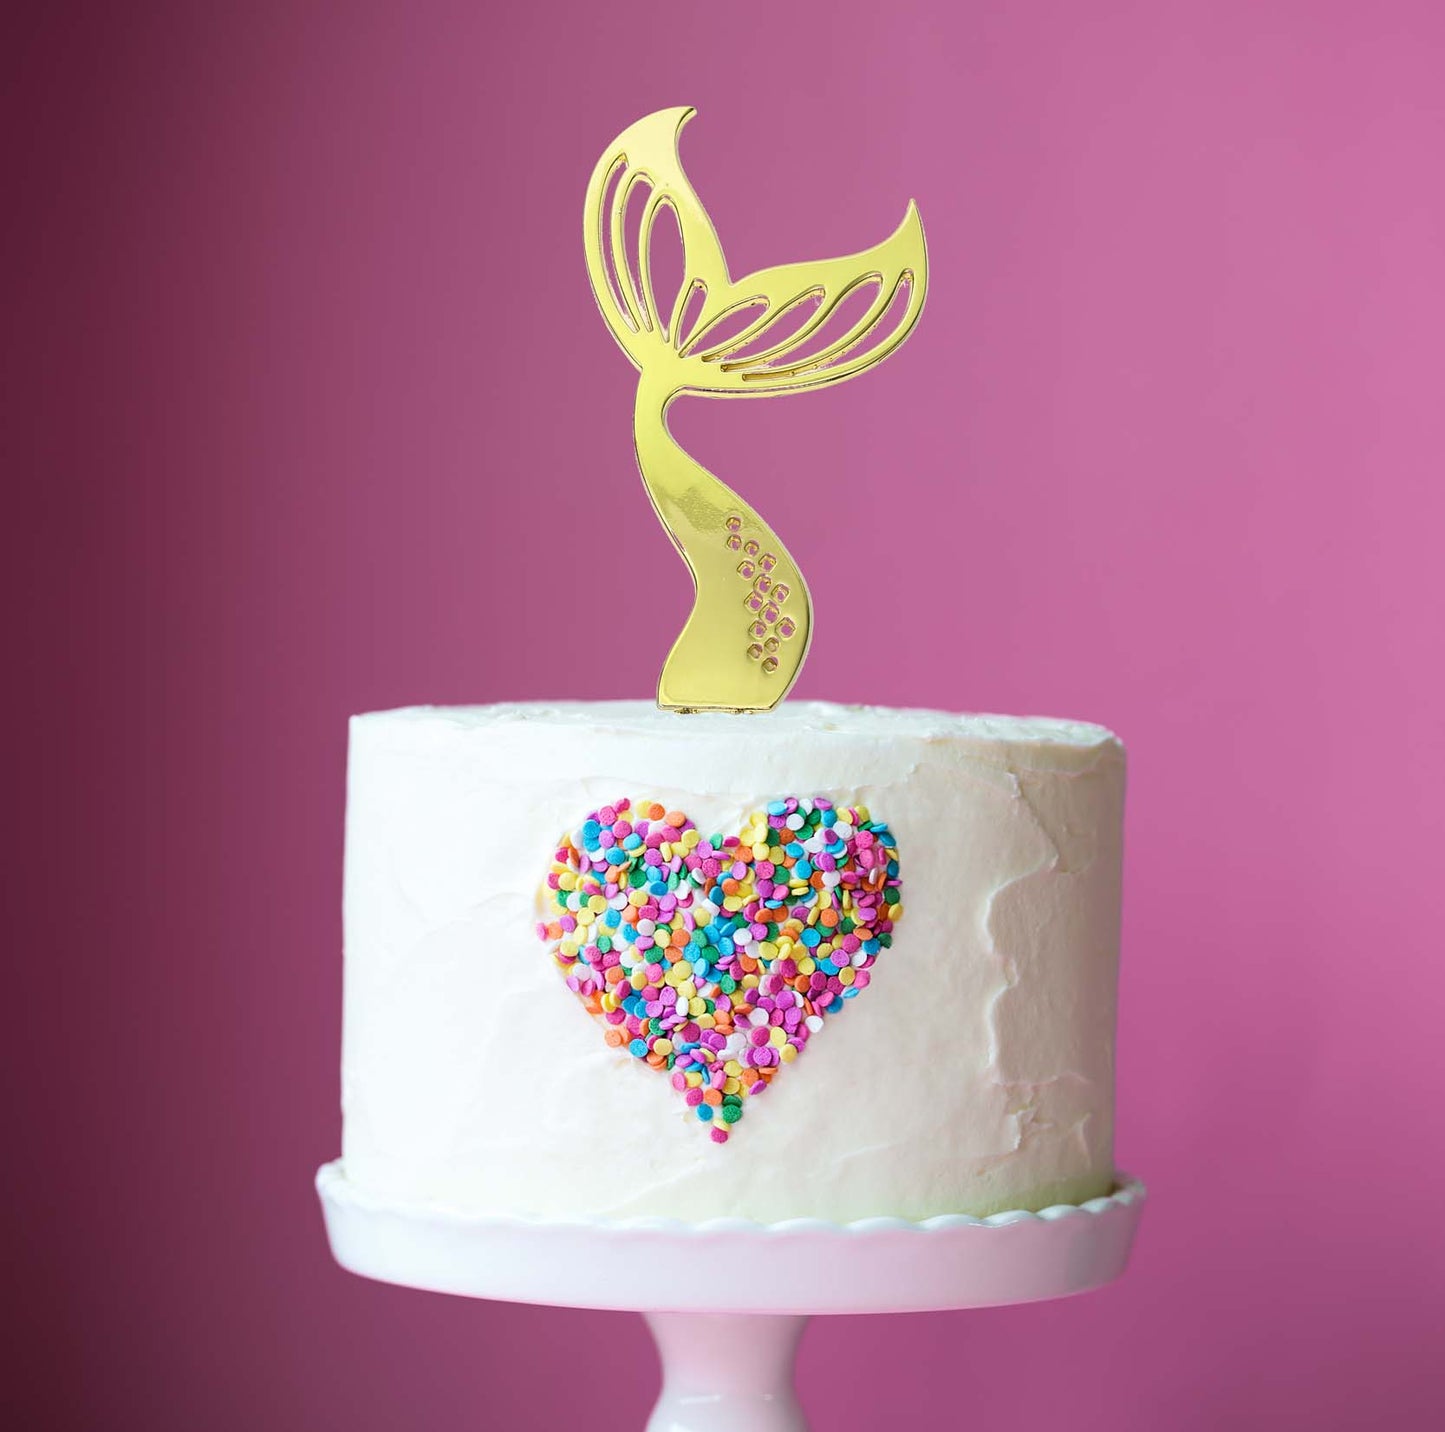 GOLD PLATED CAKE TOPPER - MERMAID TAIL GOLD TOPPER